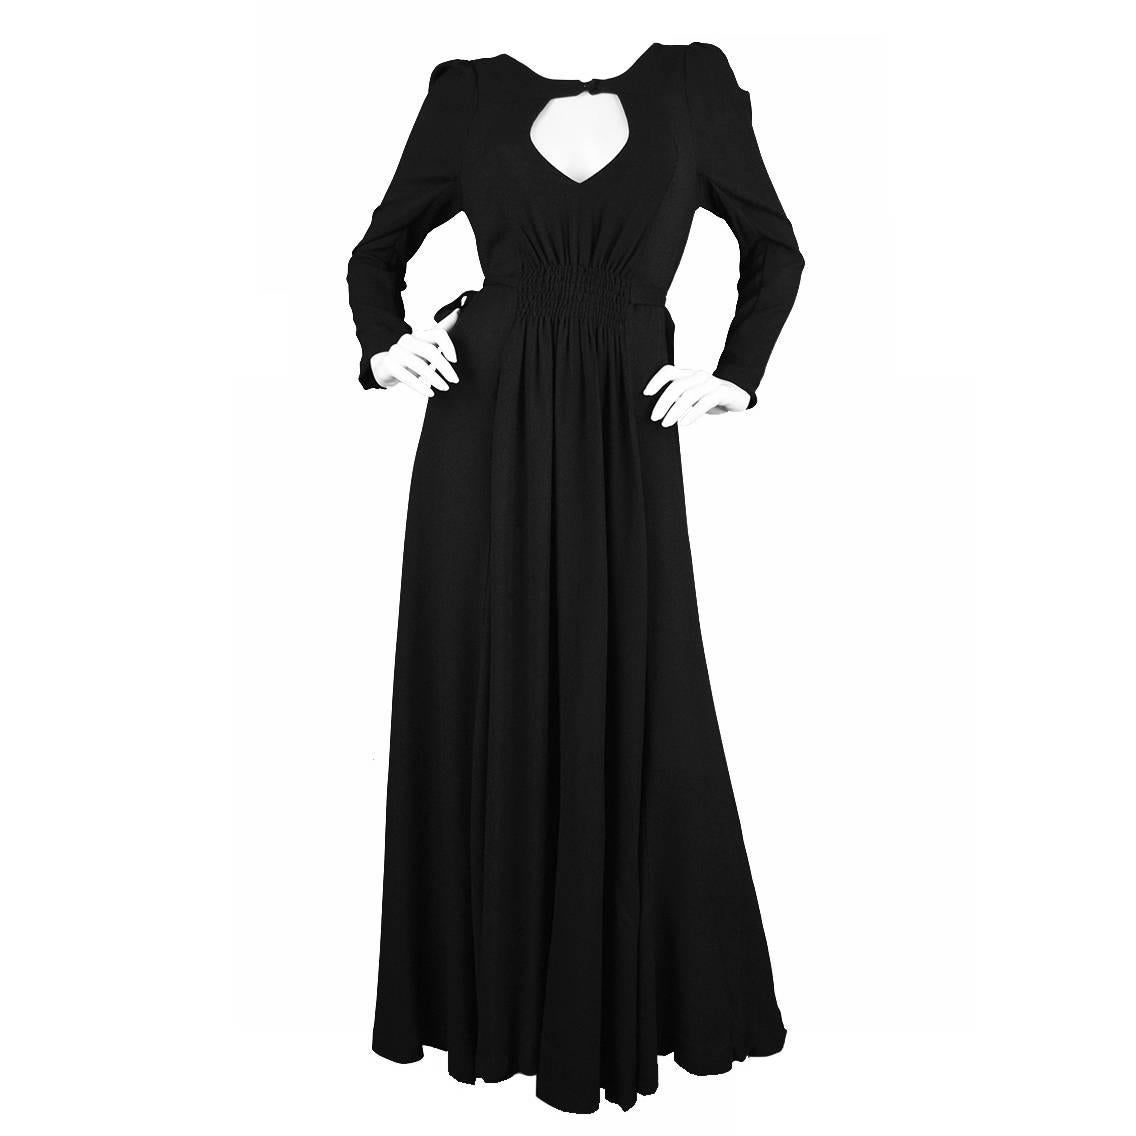 Ossie Clark for Quorum 1970s Moss Crepe Backless Keyhole Black Evening Dress For Sale